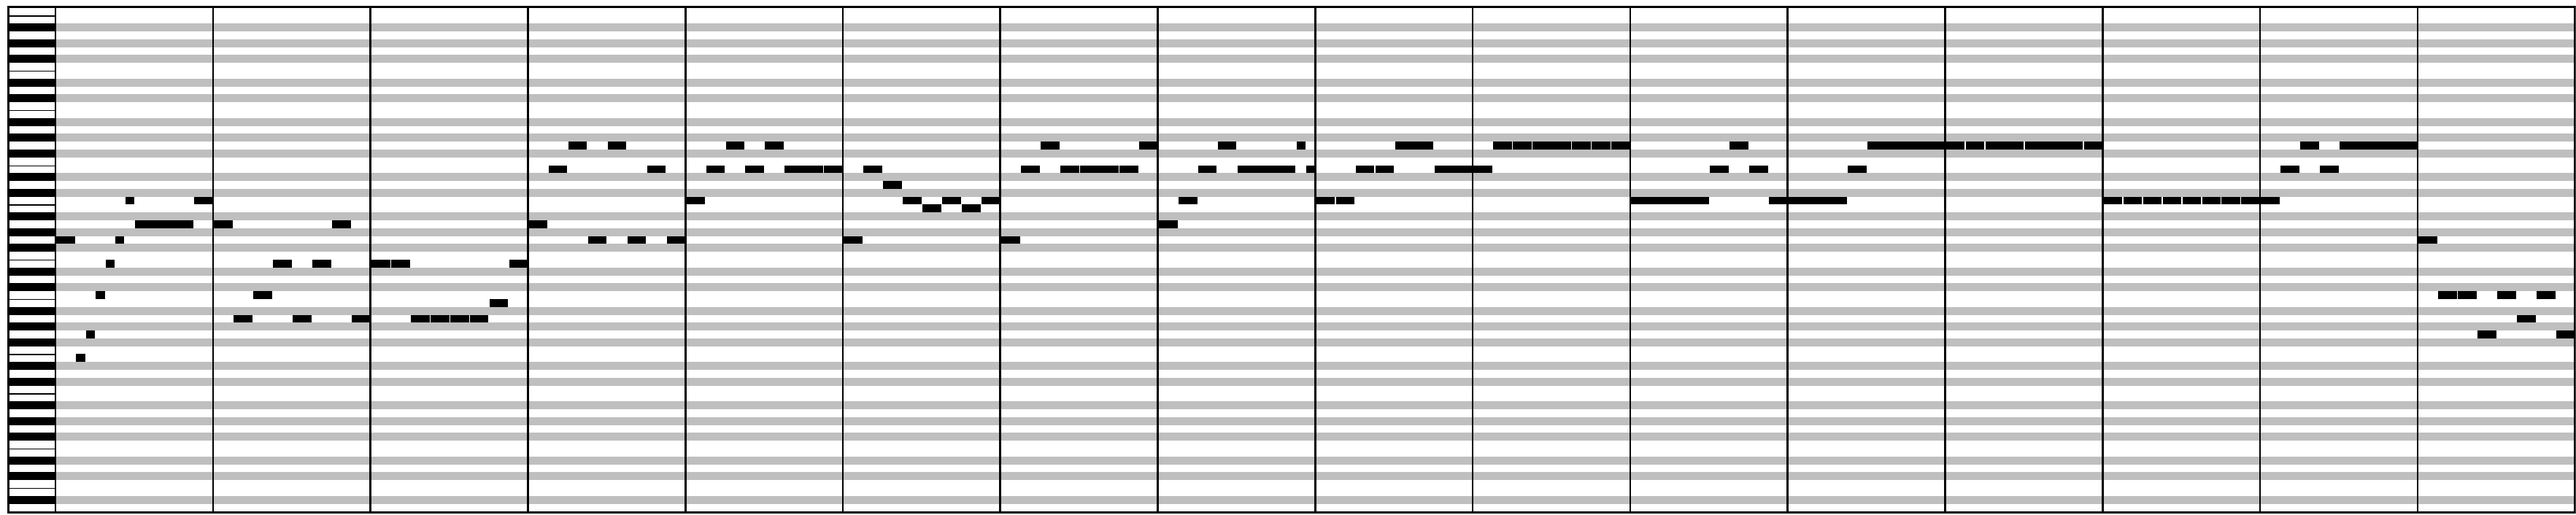 the previous note sequence where all the red out of key notes have been replaced with notes in c major